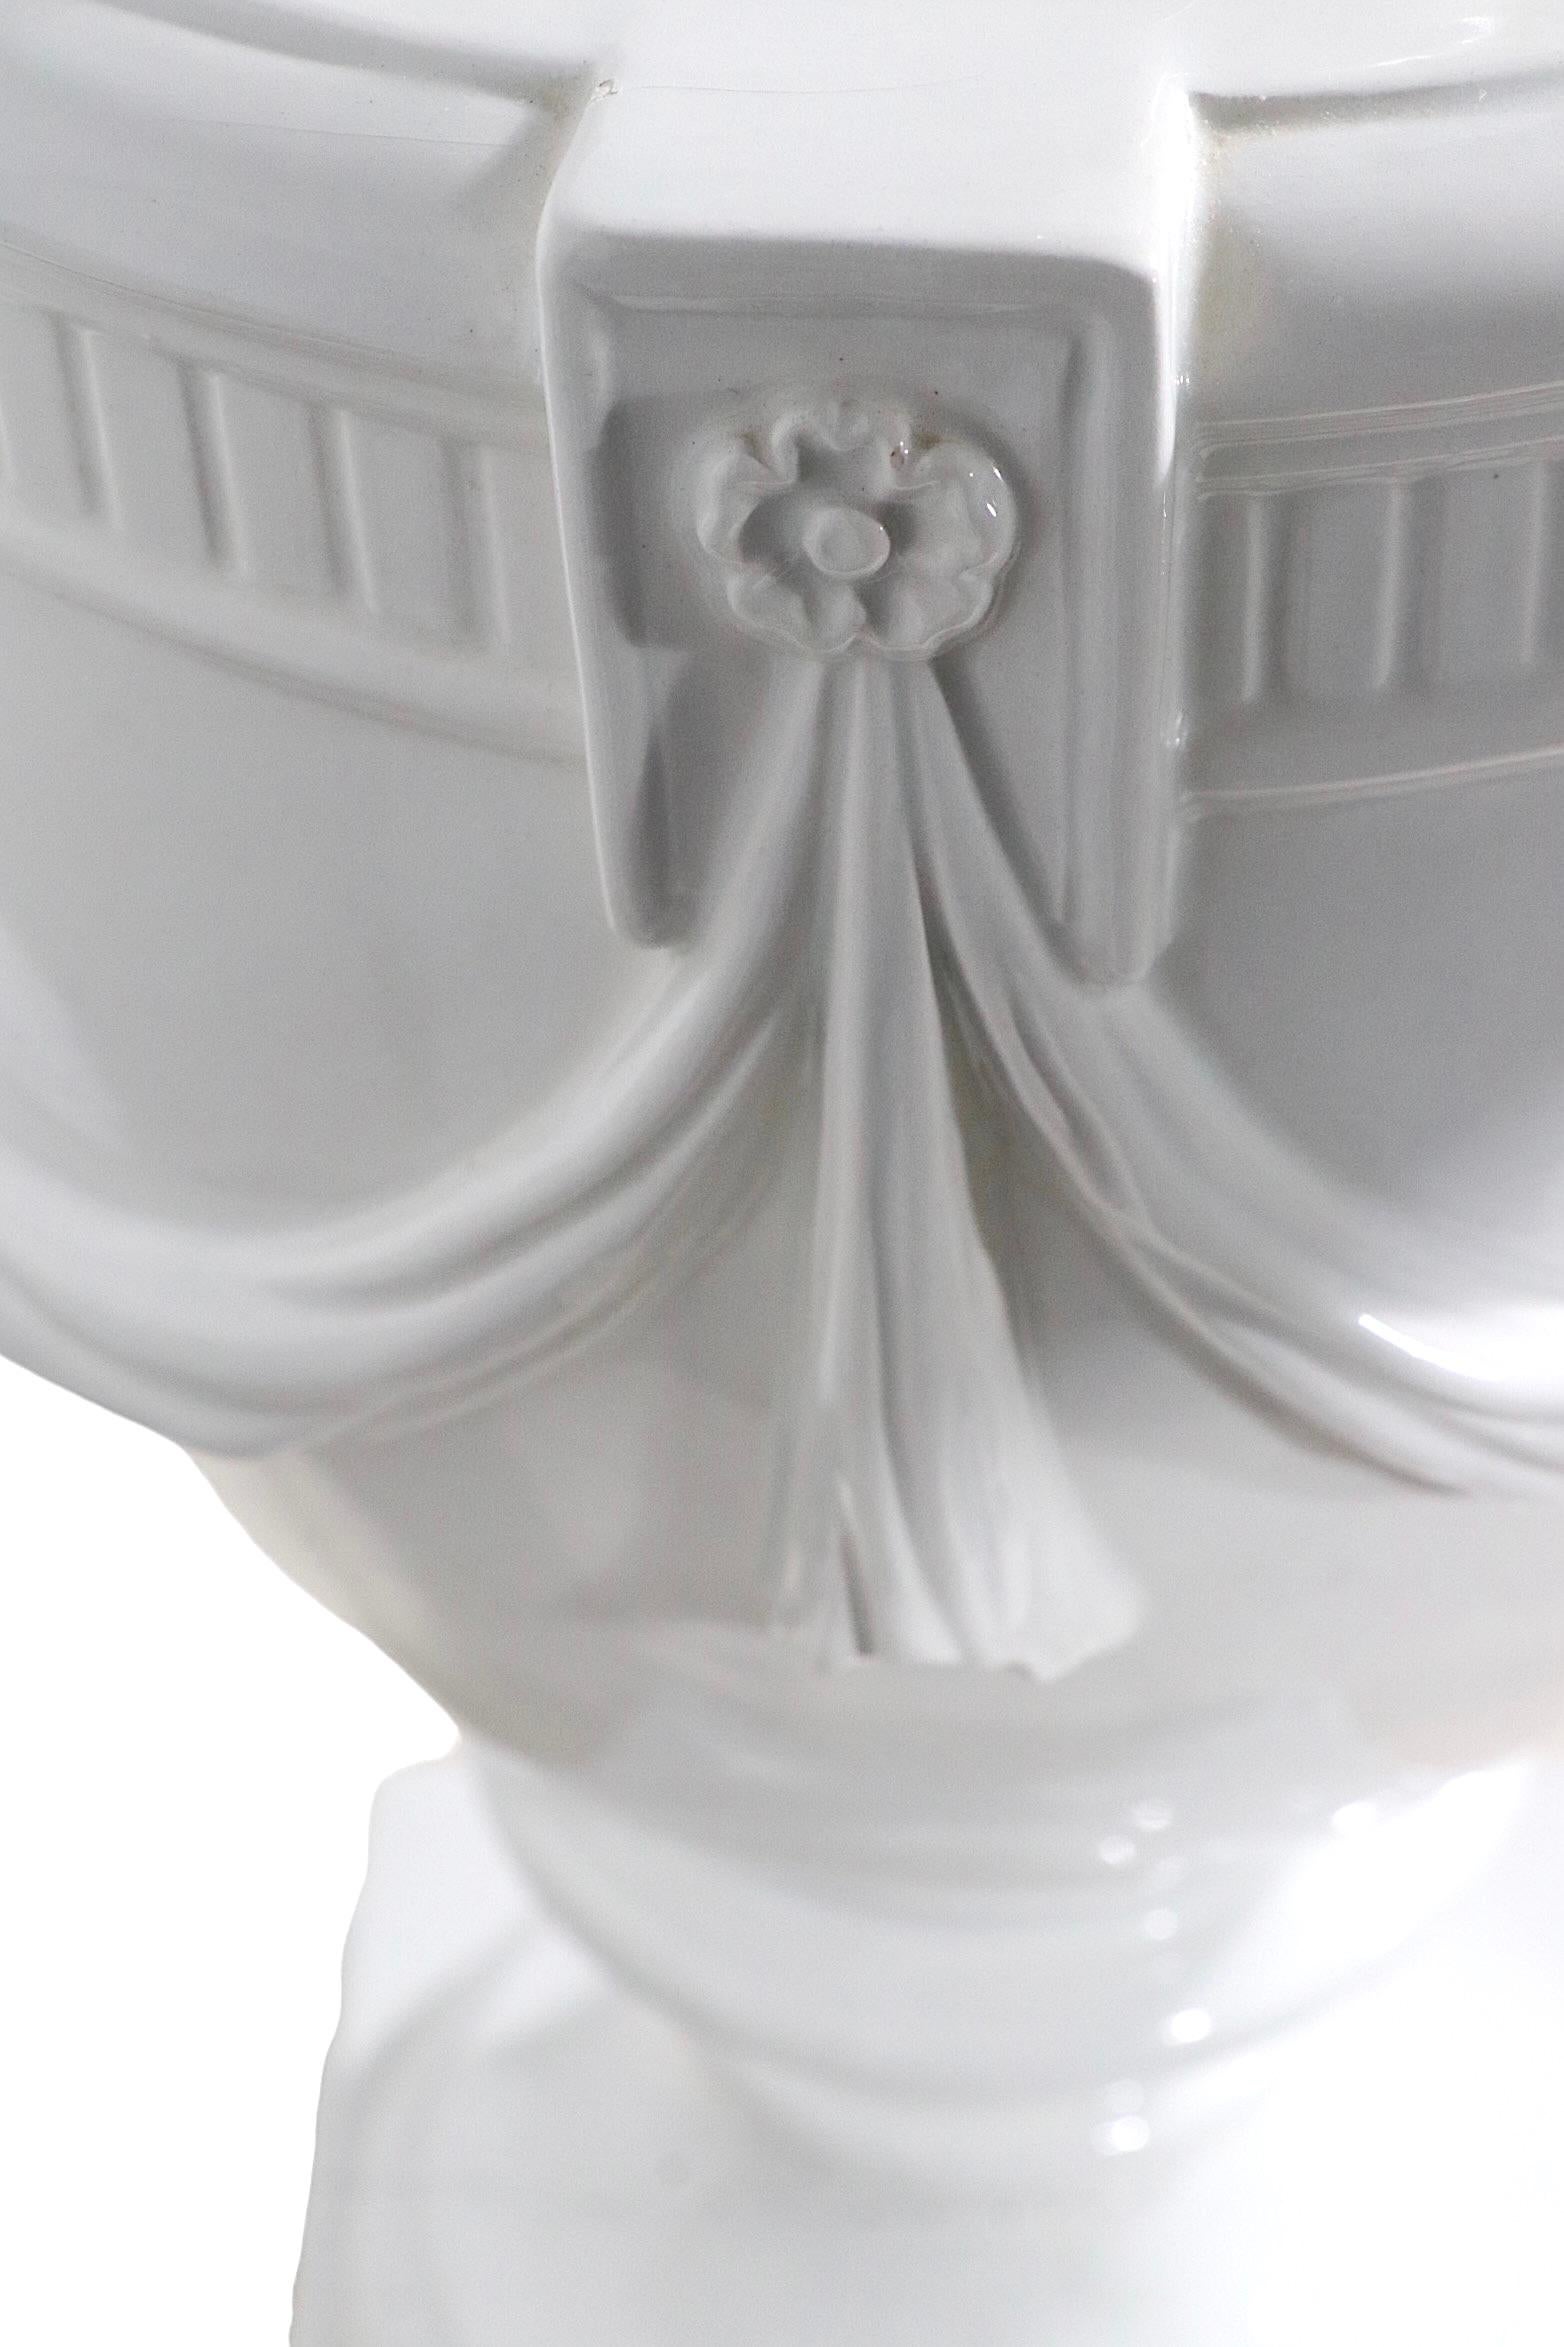 White on White Ceramic Urn Form Table Lamp Made in Italy, circa, 1950s-1970s For Sale 1